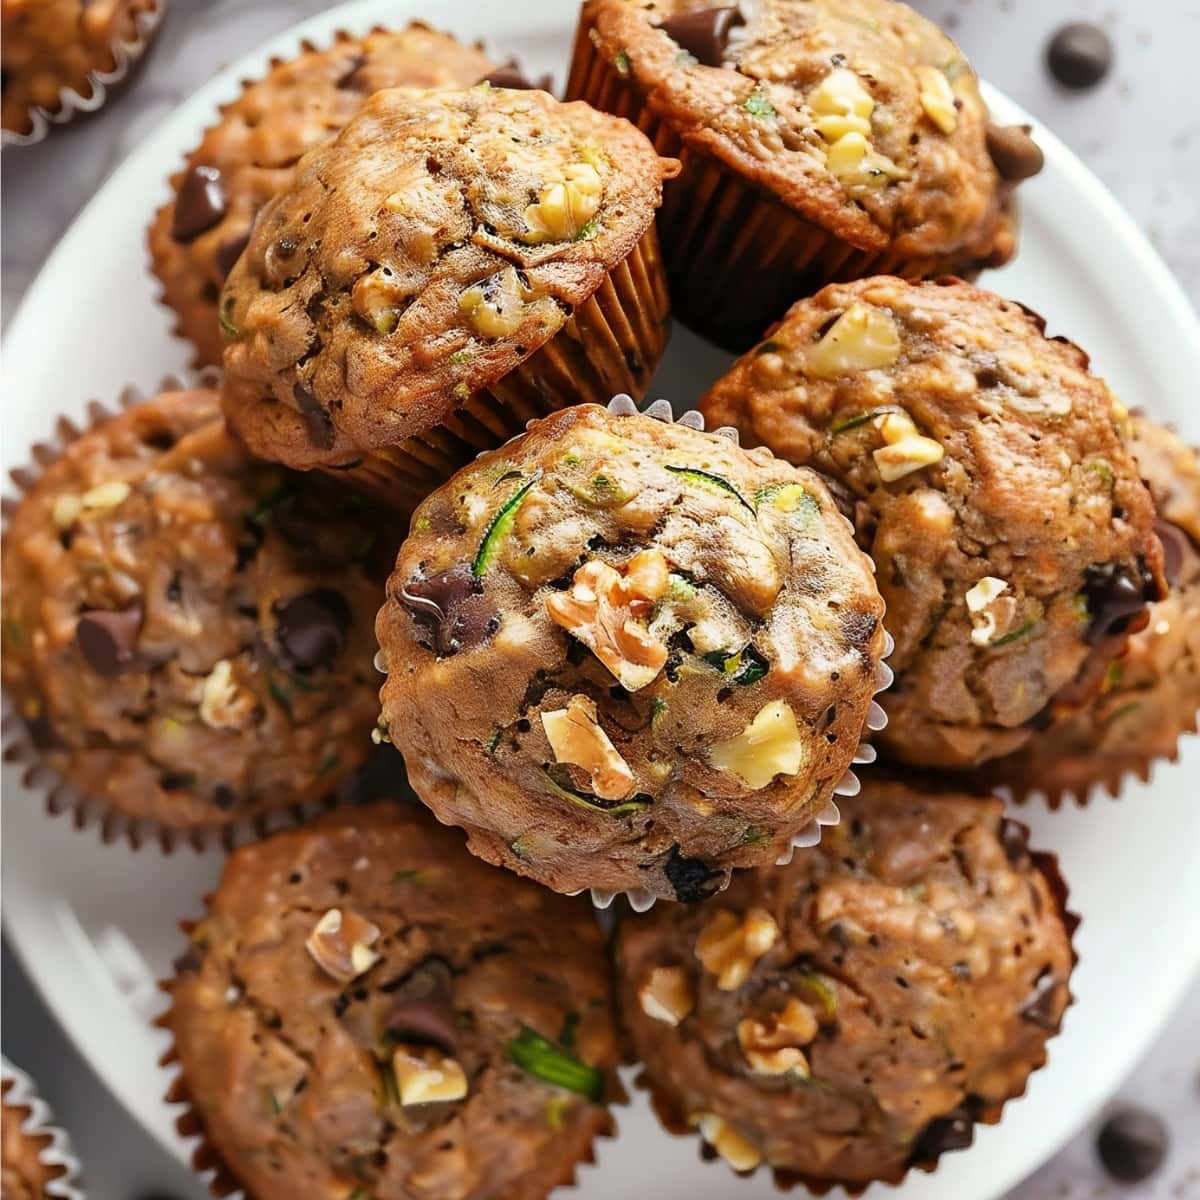 Top View of Zucchini Chocolate Chip Muffins with Walnuts, Chocolate Chips, and Pieces of Zucchini- Stacked on a White Plate